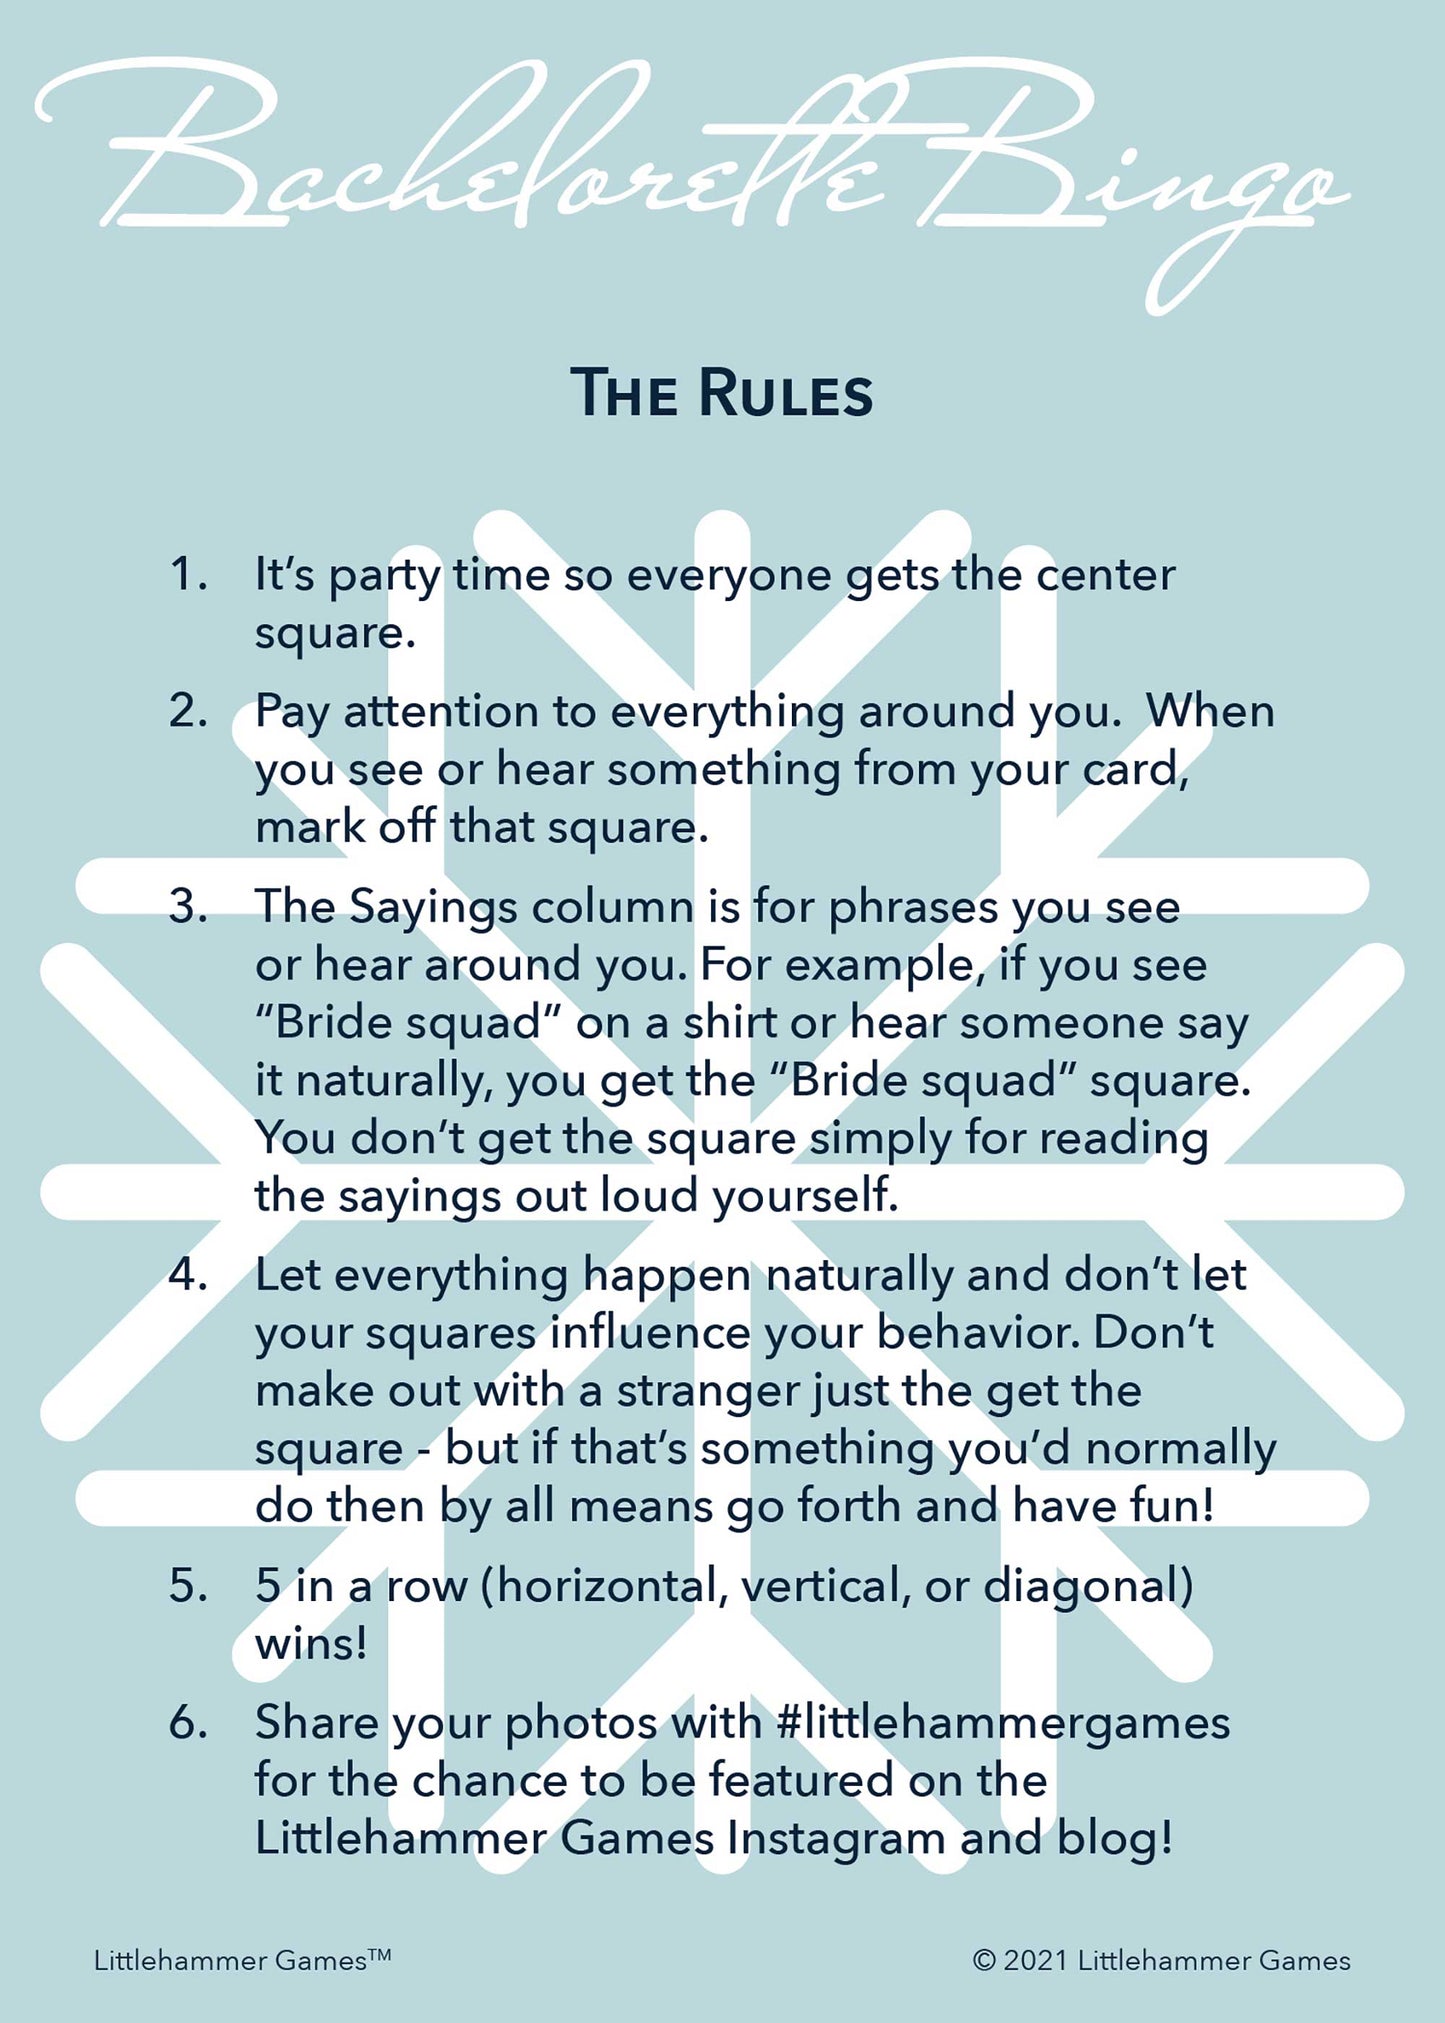 Bachelorette Bingo rules card with a snowflake on a light blue background